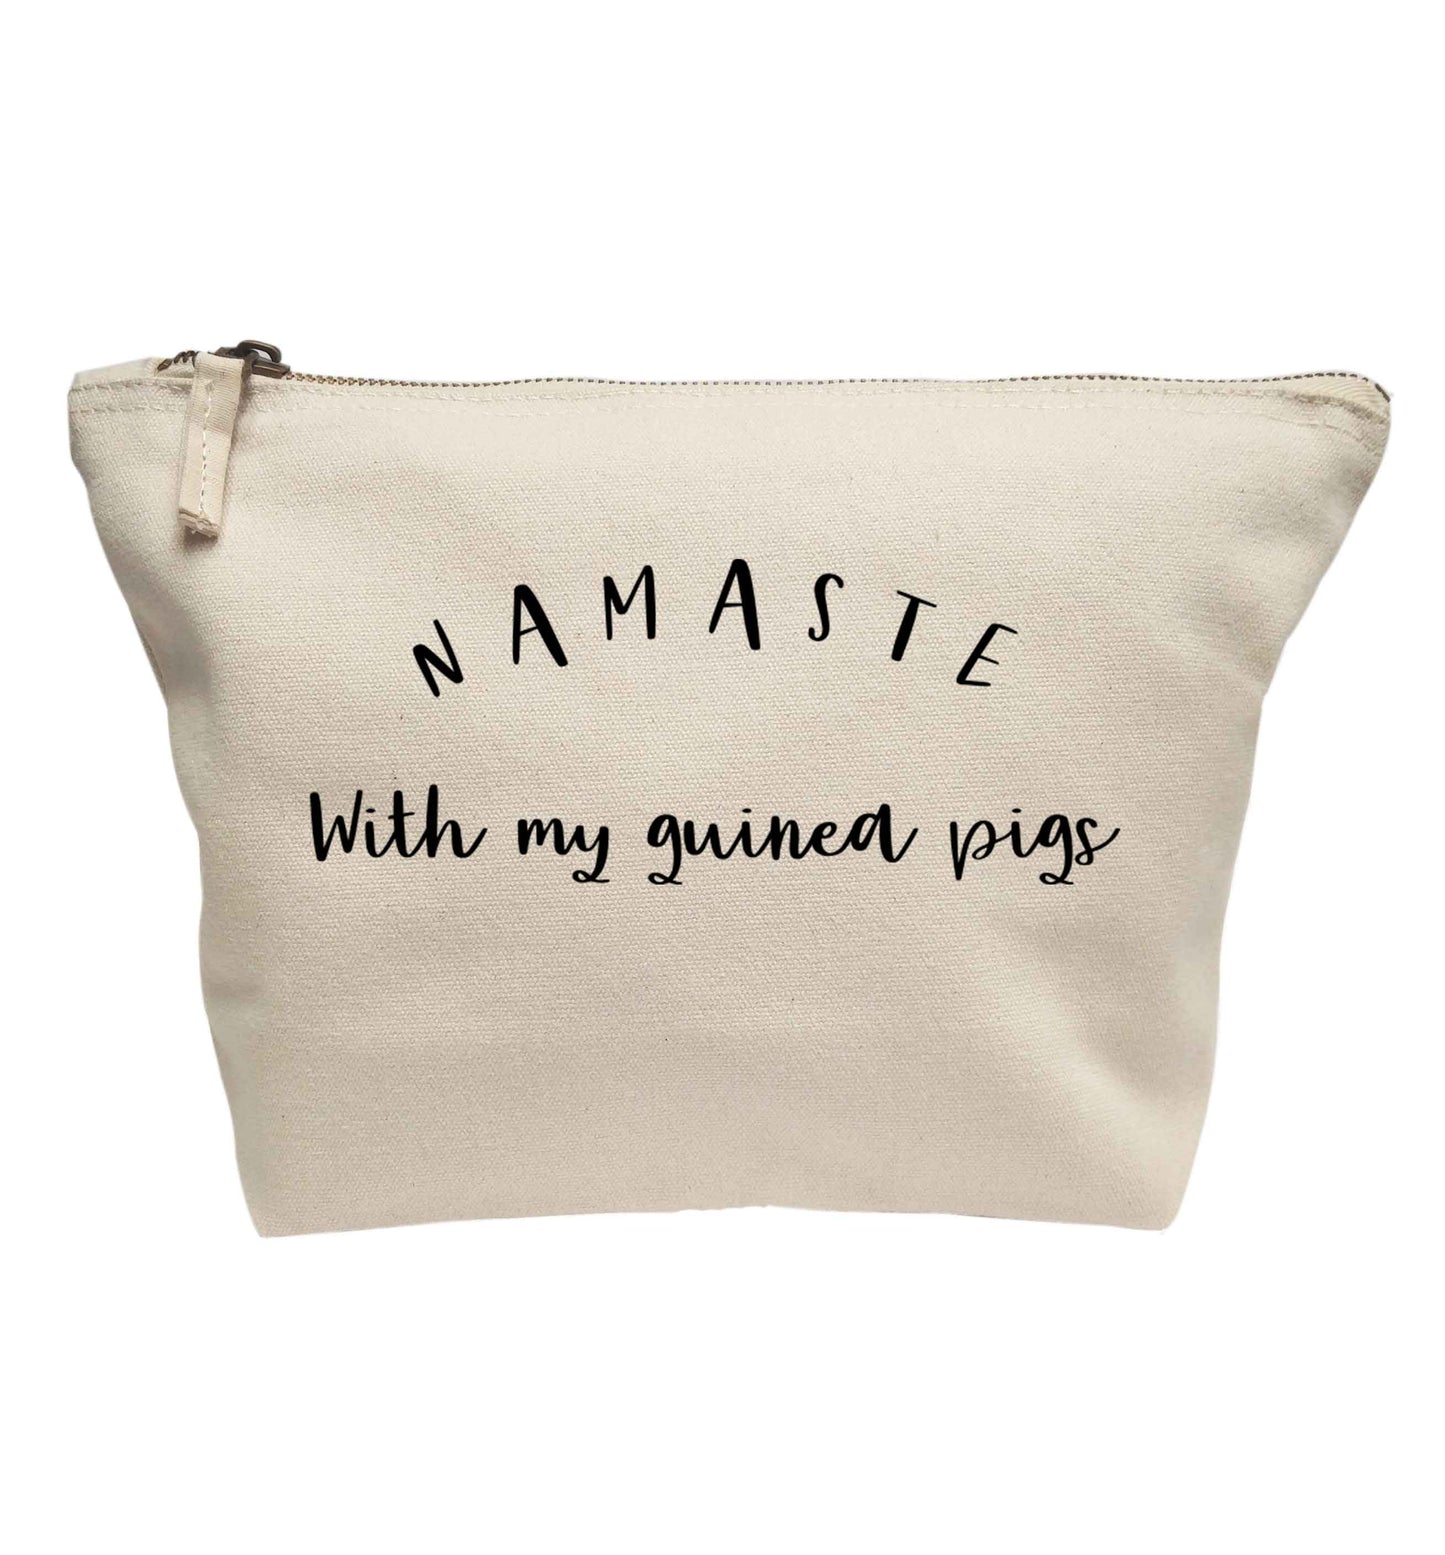 Namaste with my guinea pigs | makeup / wash bag